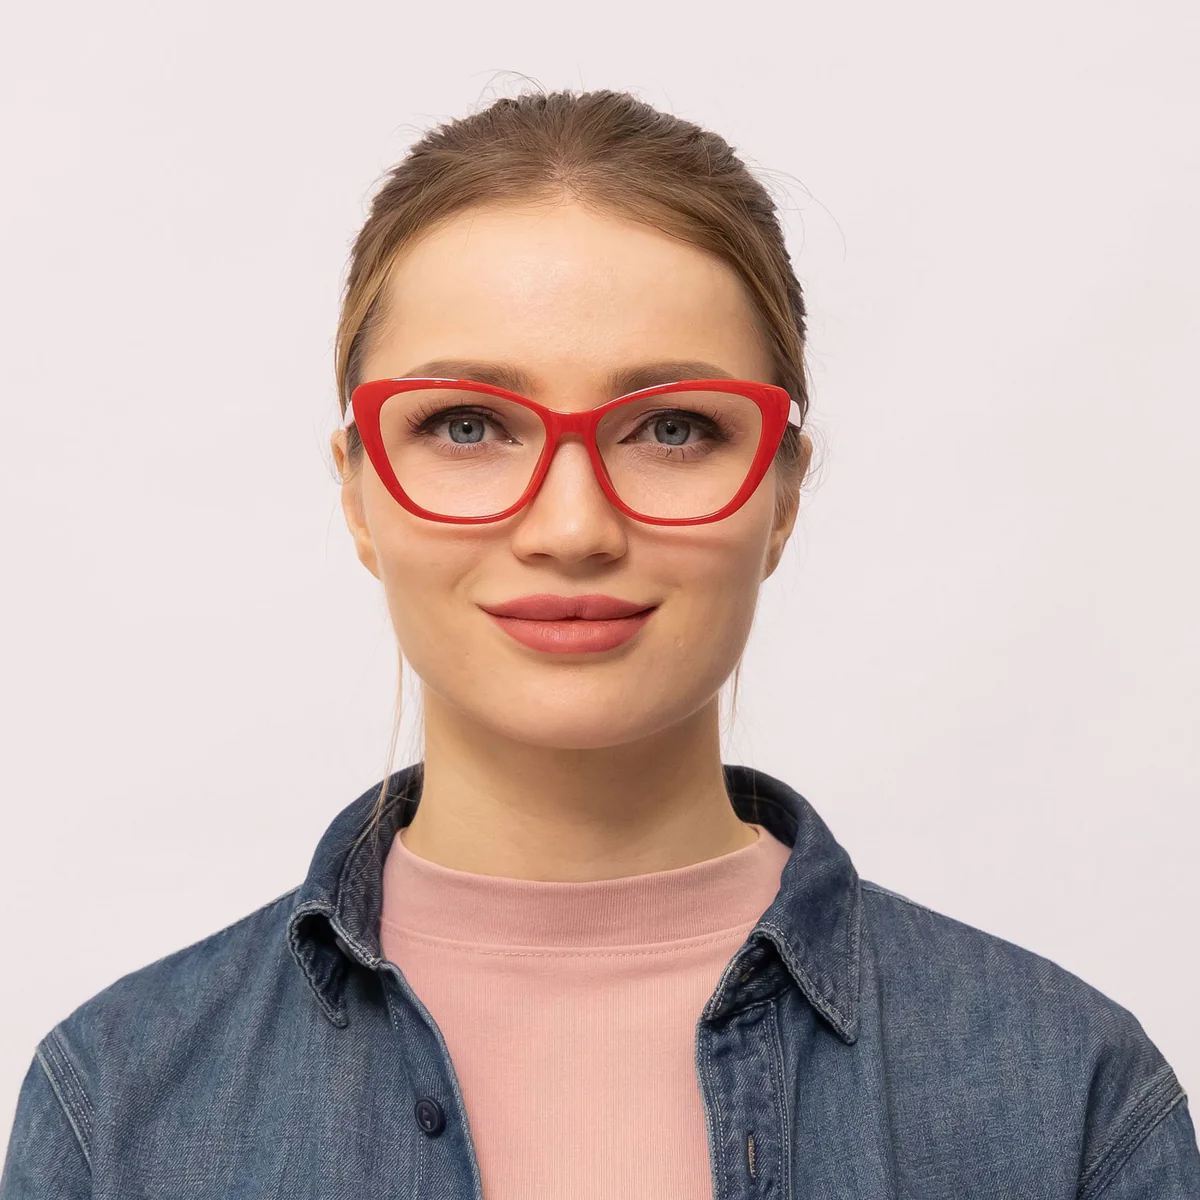 woman wears red cat eye glasses that makes her eyes appear bigger